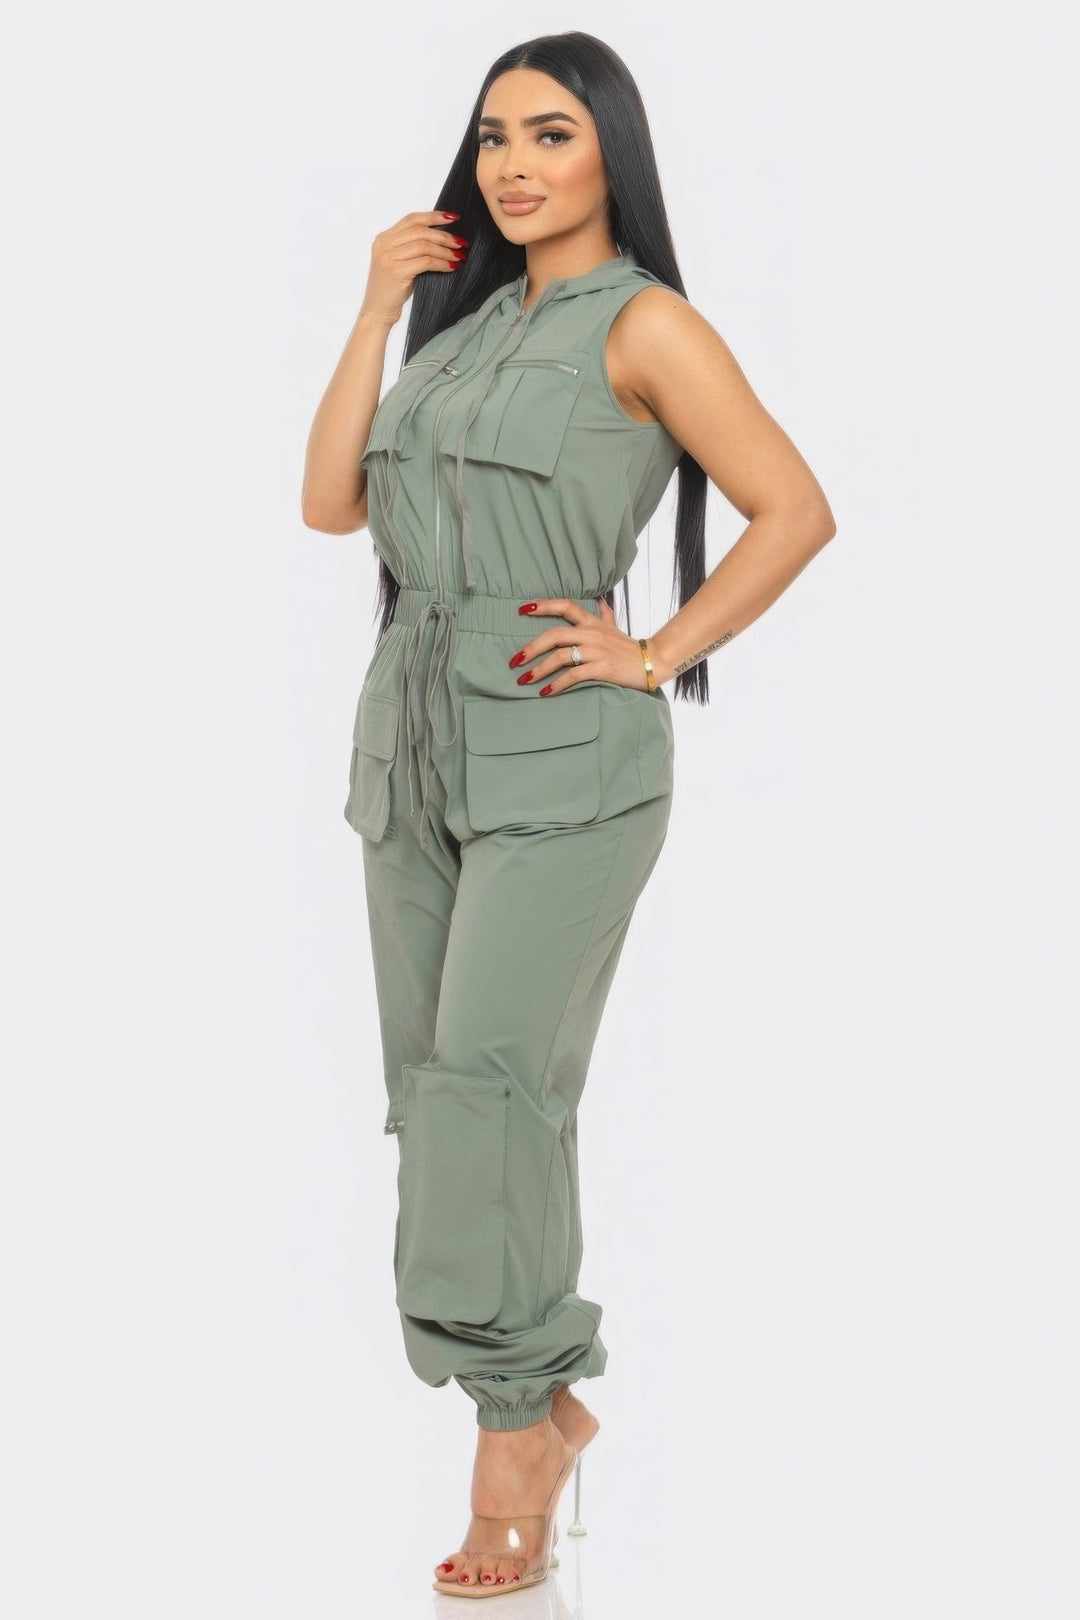 Cargo Jumpsuit with Hoodie & Zipper Front | Breathable Fabric & Relaxed Fit | Sizes S-L